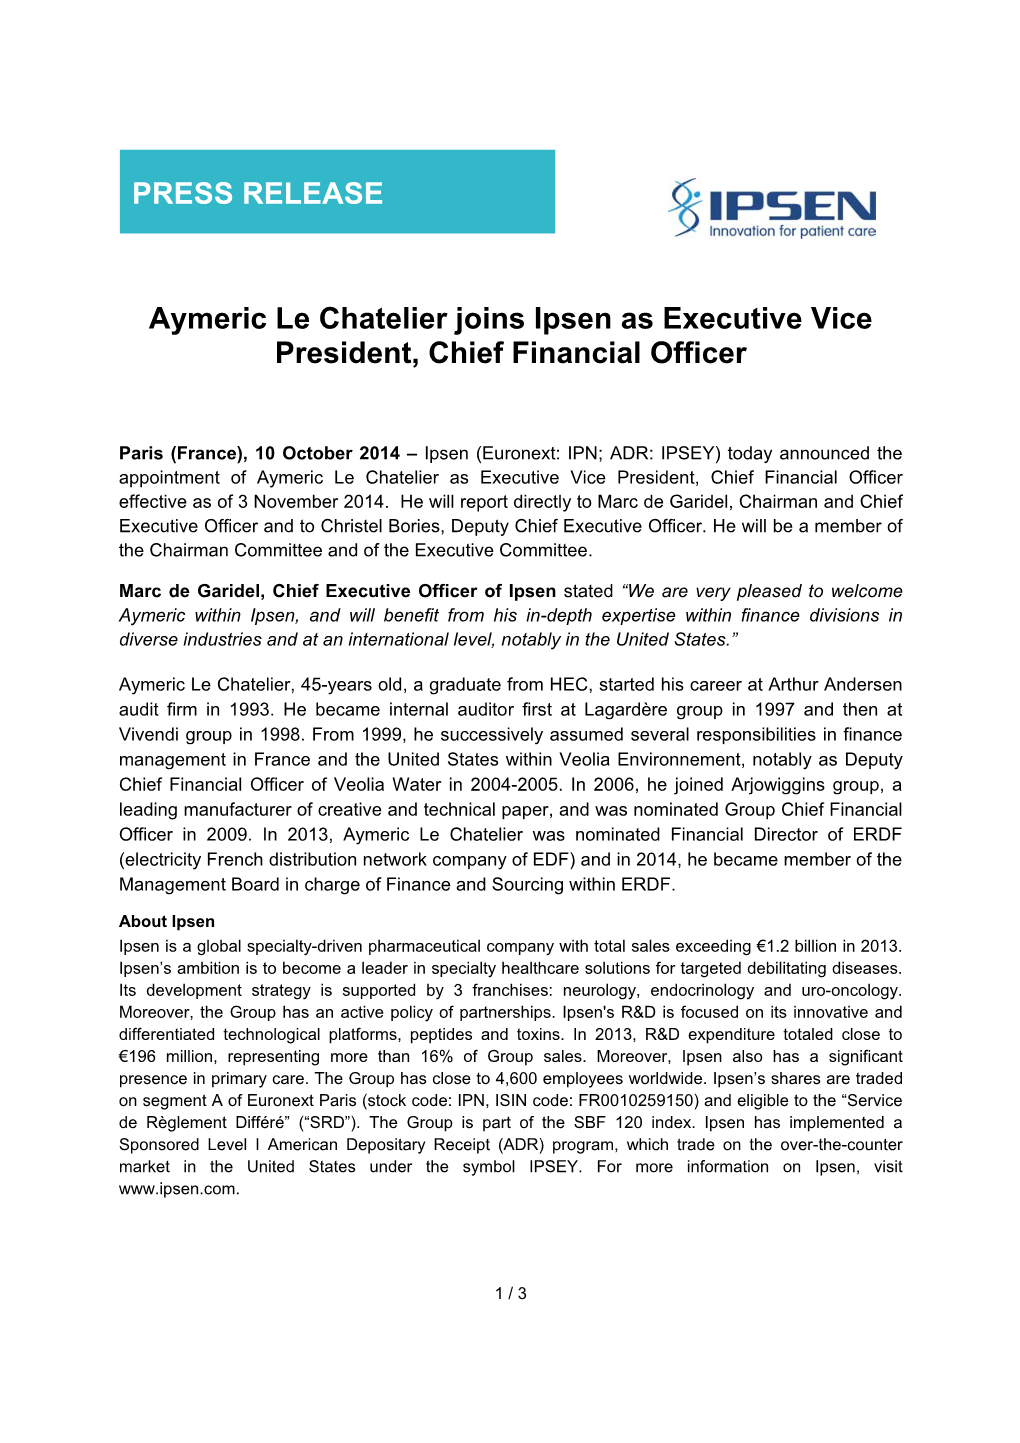 PRESS RELEASE Aymeric Le Chatelier Joins Ipsen As Executive Vice President, Chief Financial Officer